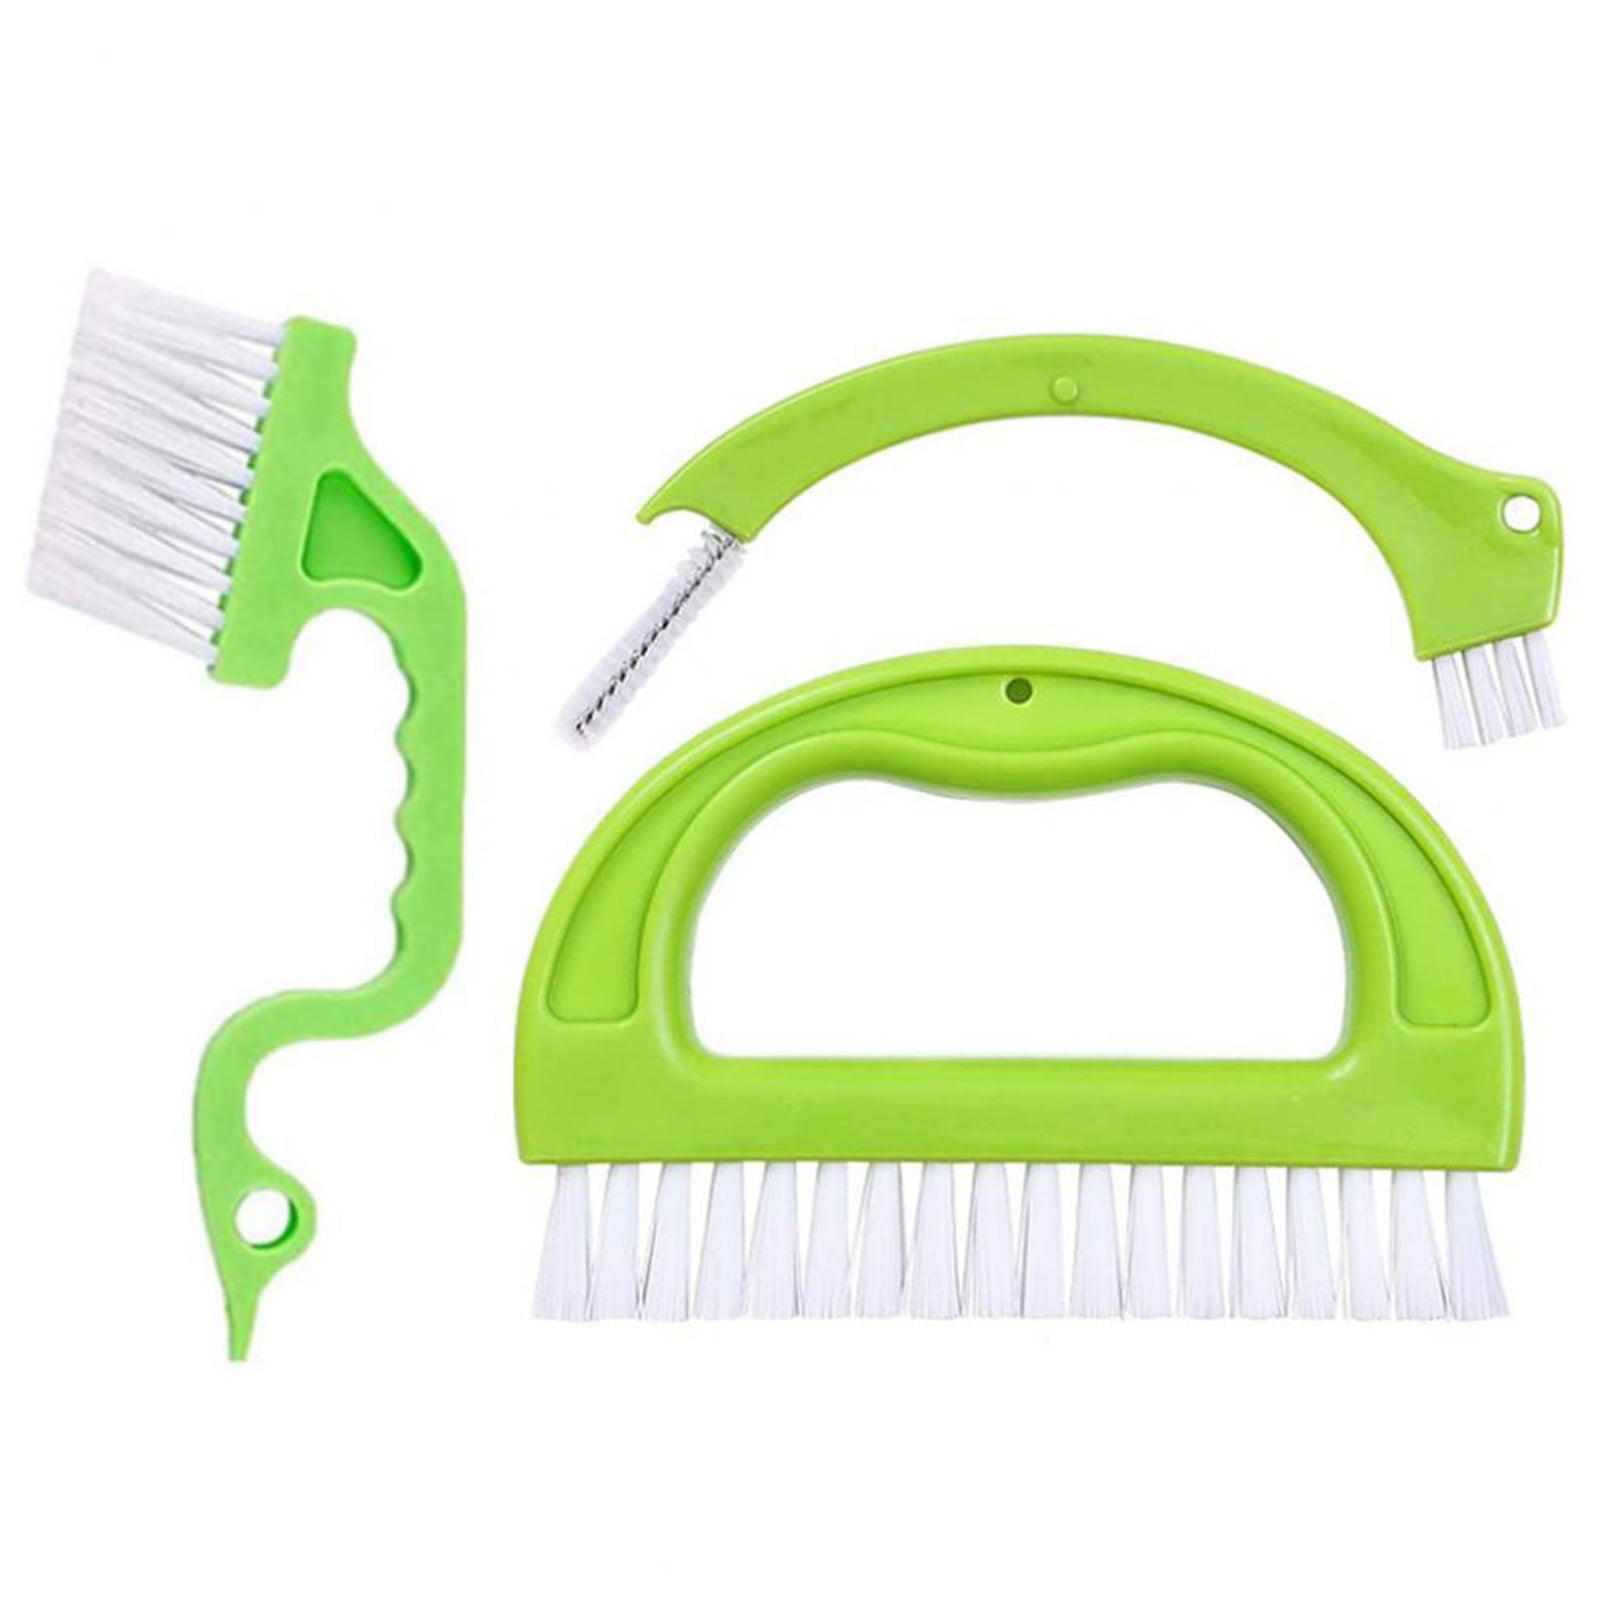 Hot Sale 1 Set Tile Brushes Grout Cleaner Joint Scrubber For Cleaning Bathroom 